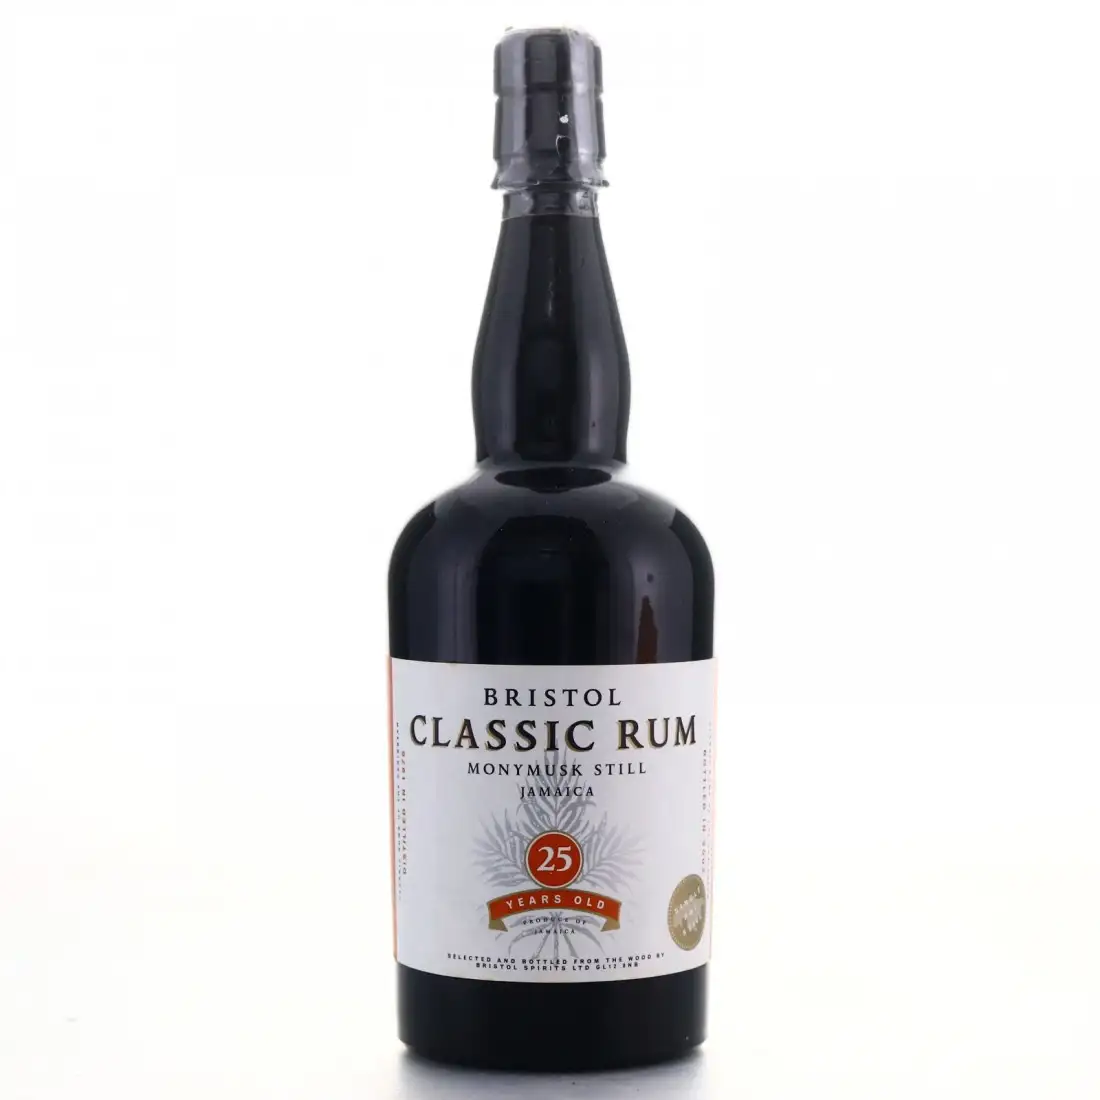 Image of the front of the bottle of the rum 1976